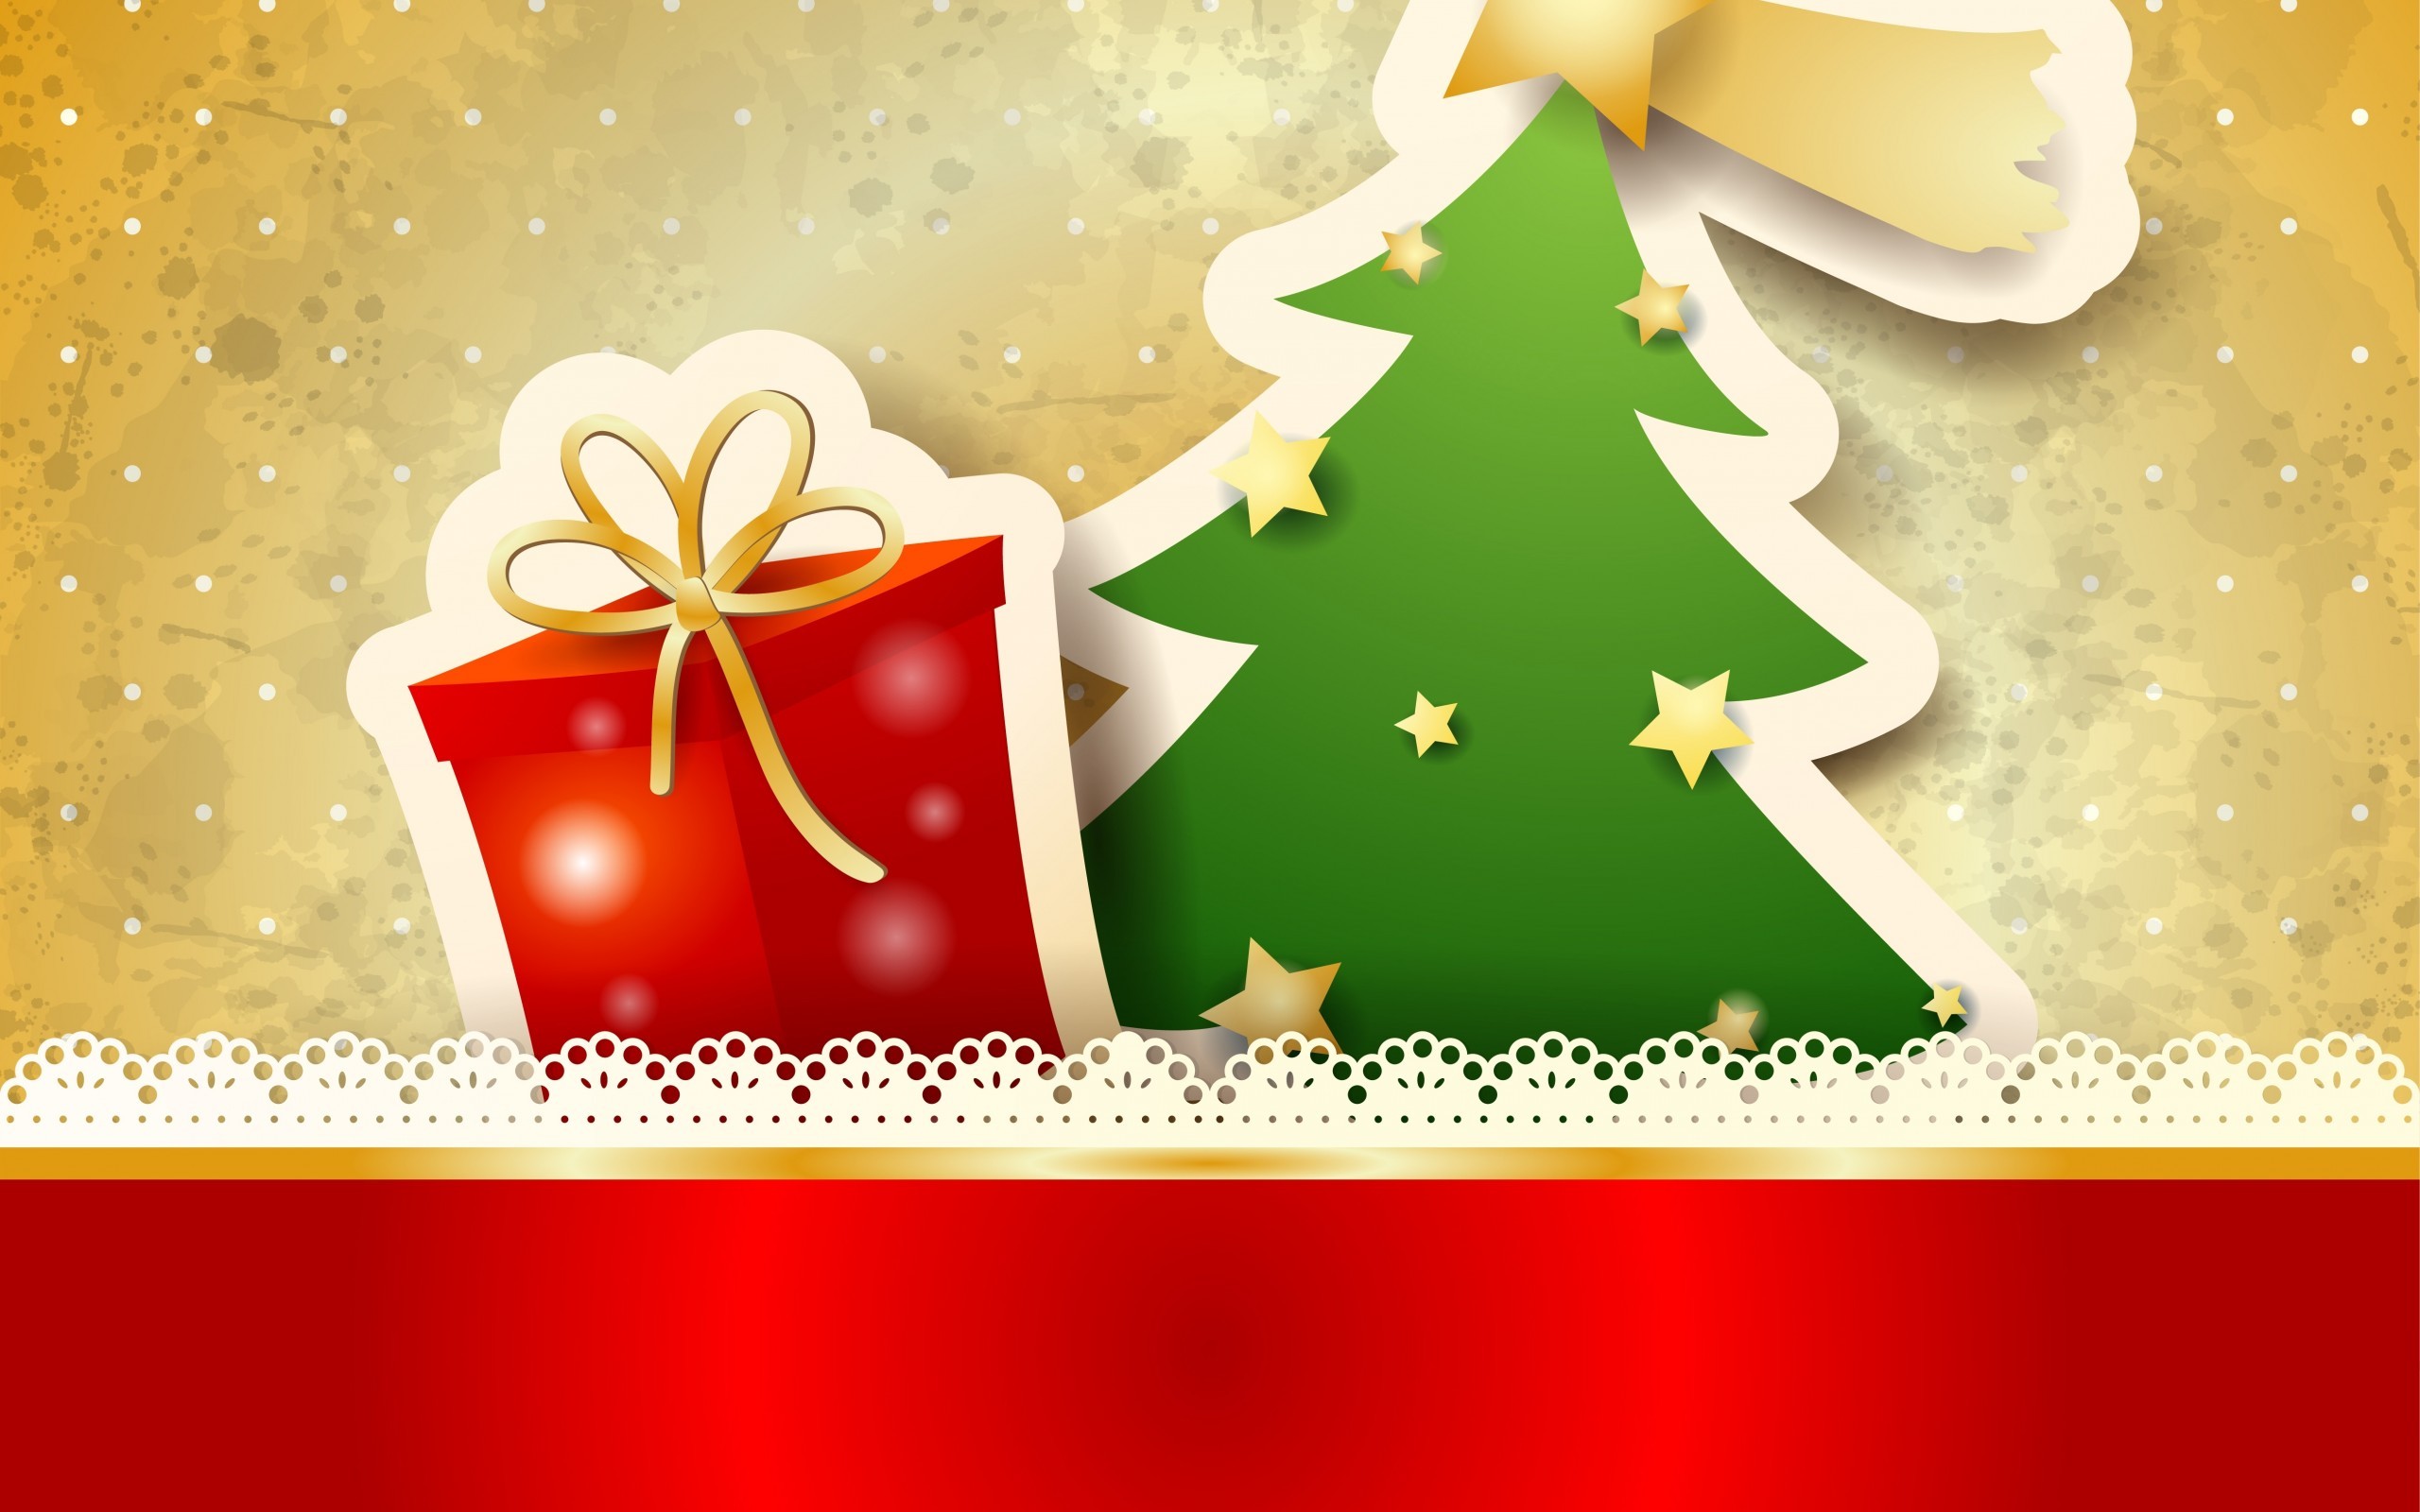 General 2560x1600 Christmas New Year presents Christmas tree holiday